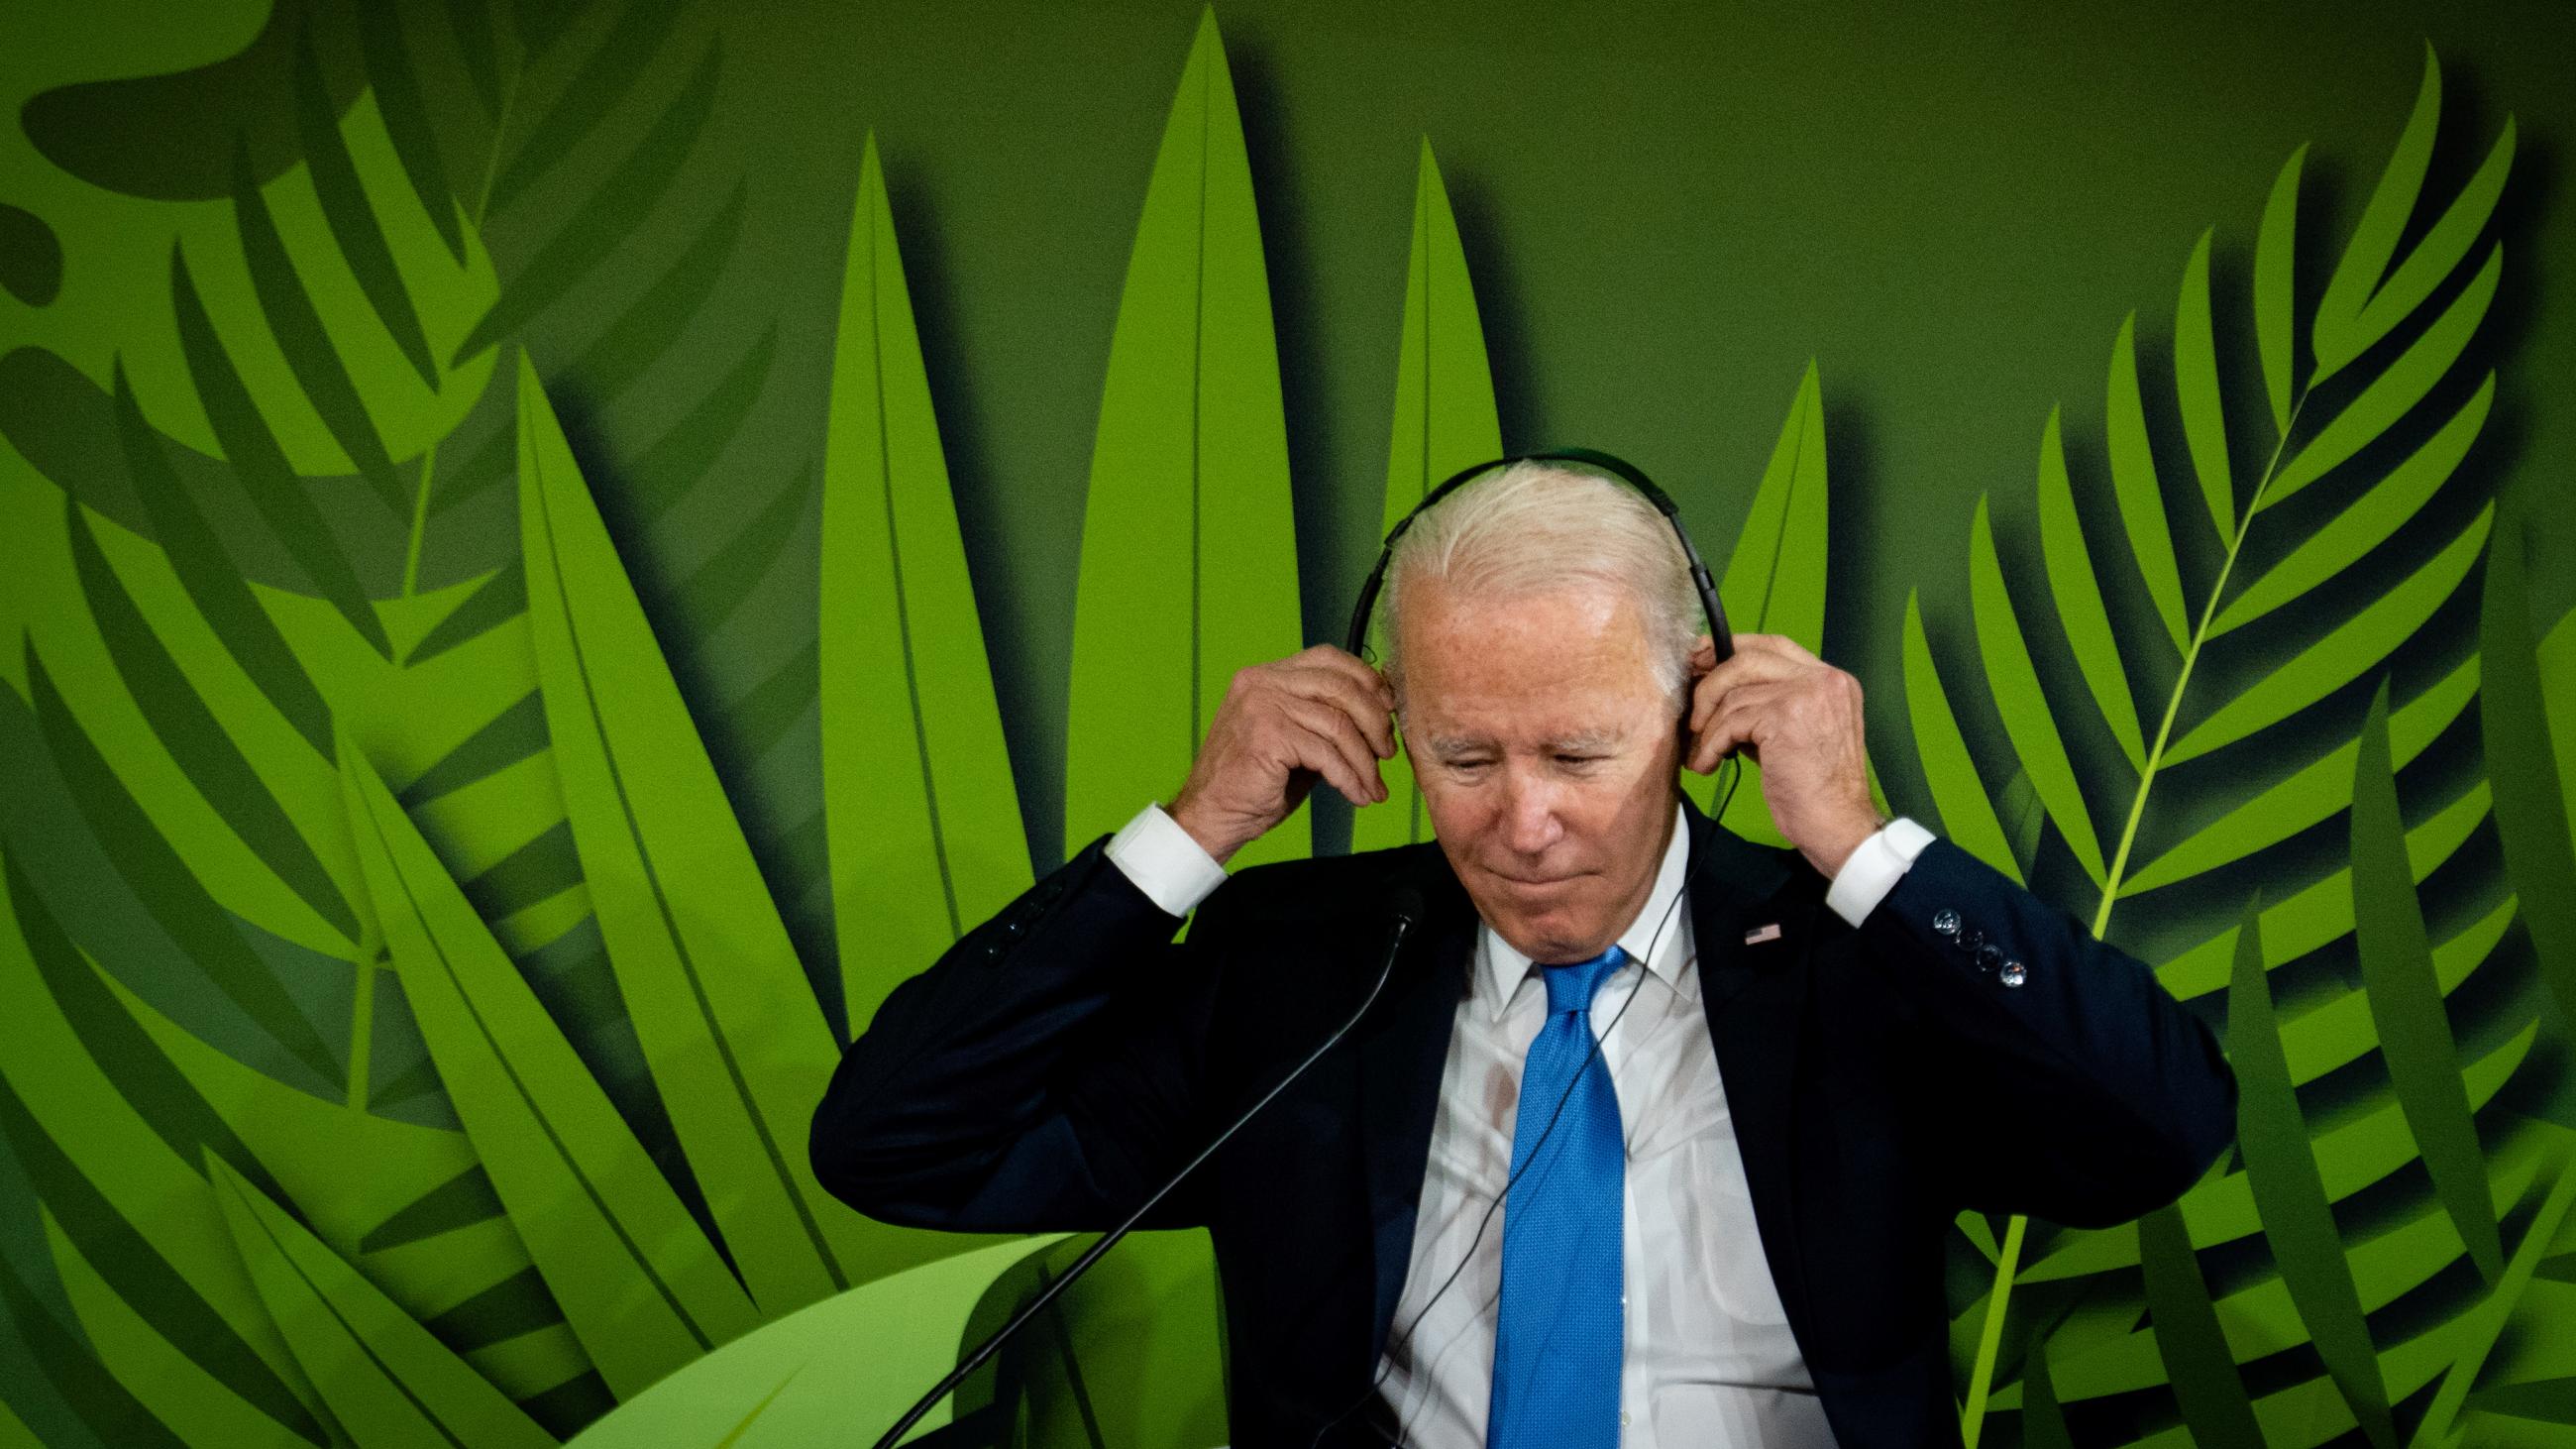 U.S. President Joe Biden puts on headphones to listen to speeches during the "Action on Forests and Land Use" event.